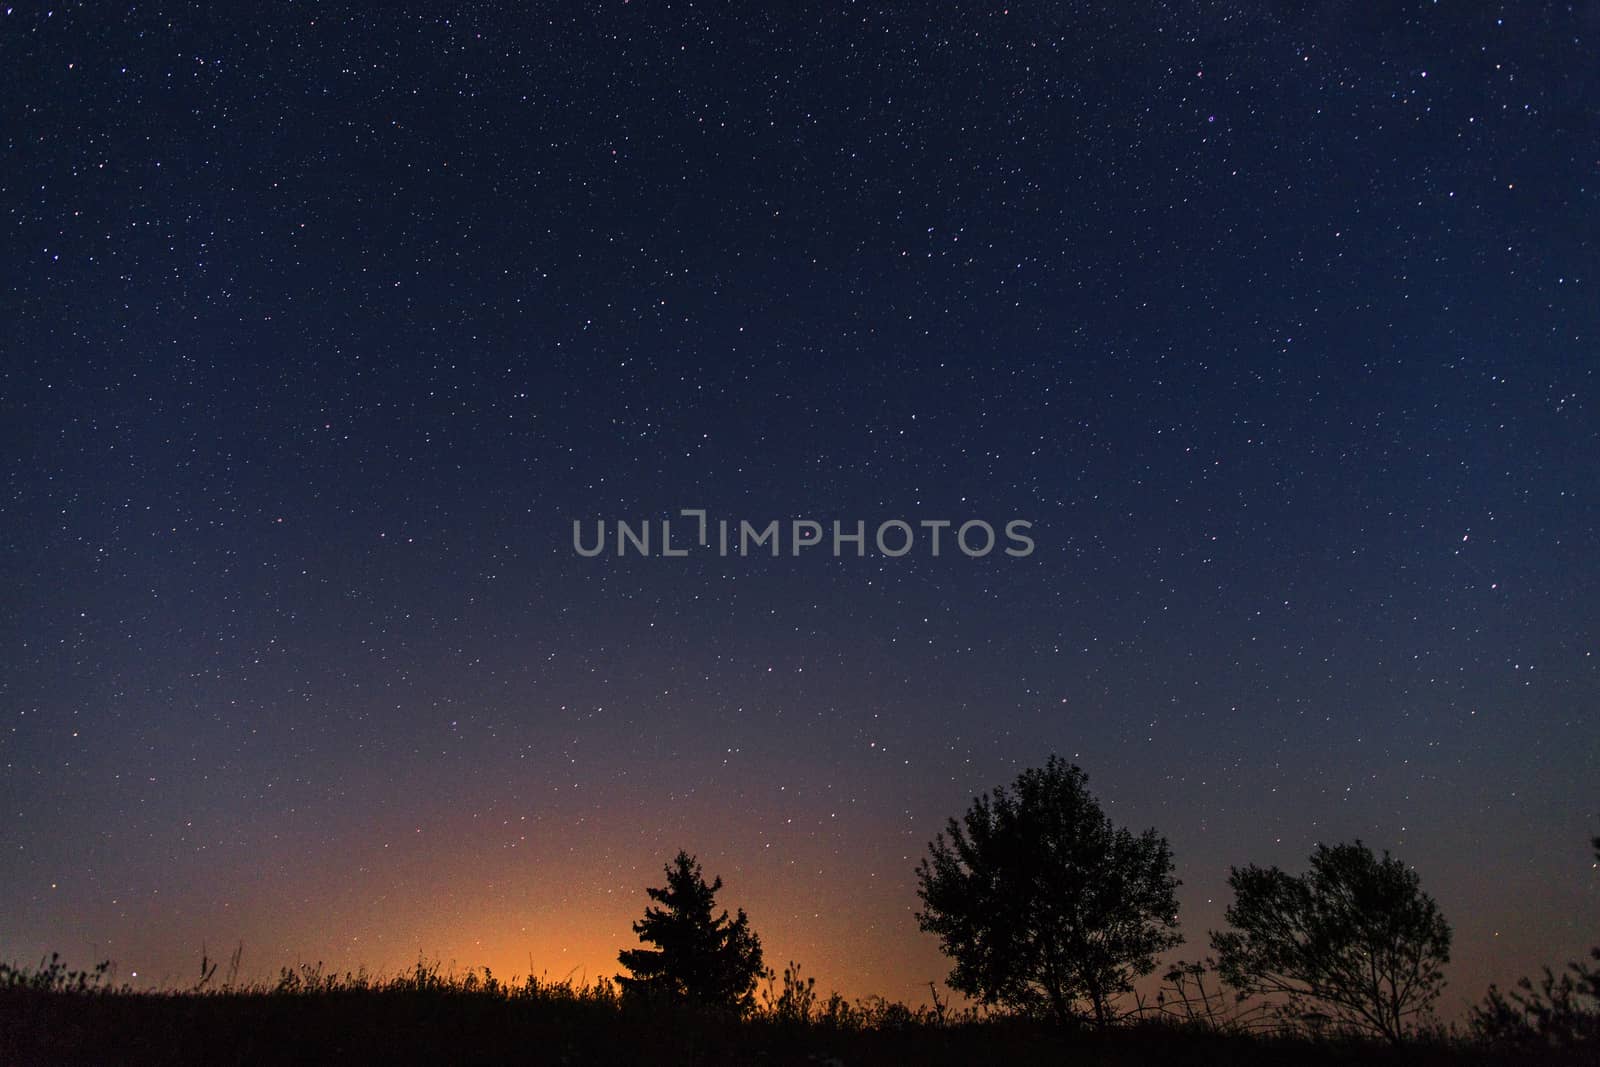 A night starry sky through lonely trees and grass. The last light of the sun's rays at the bottom of the image.